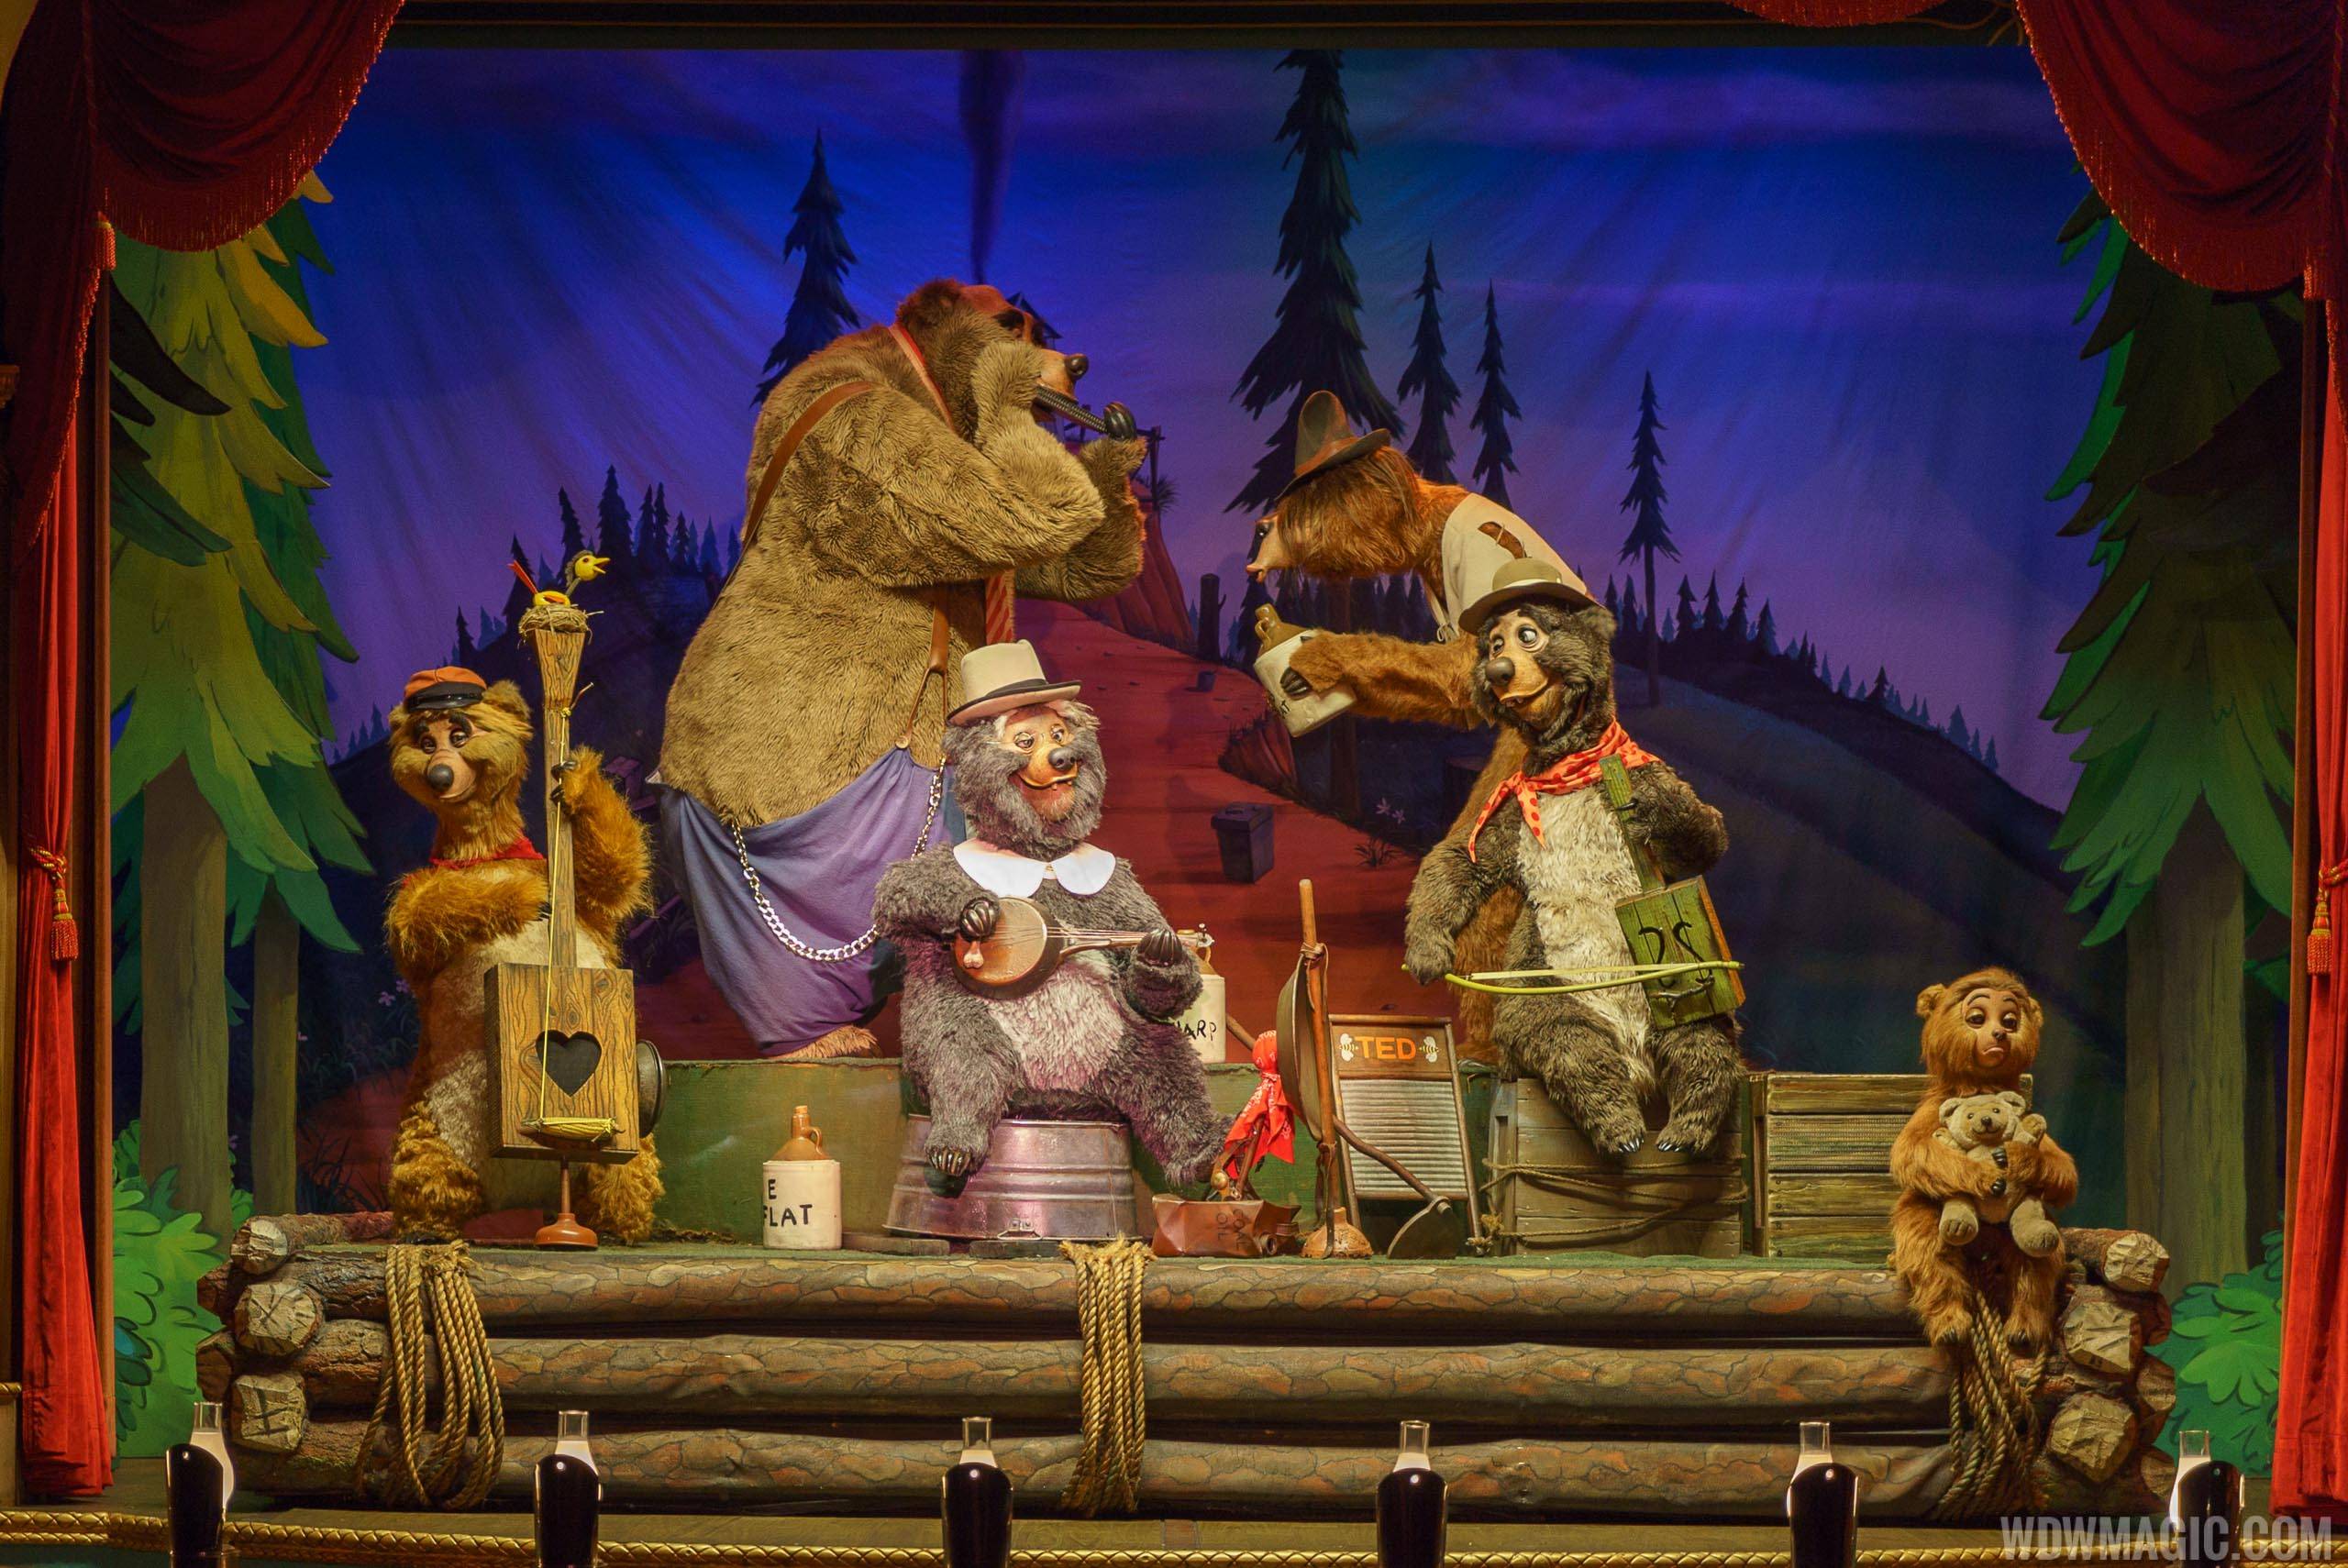 Country Bear Jamboree overview